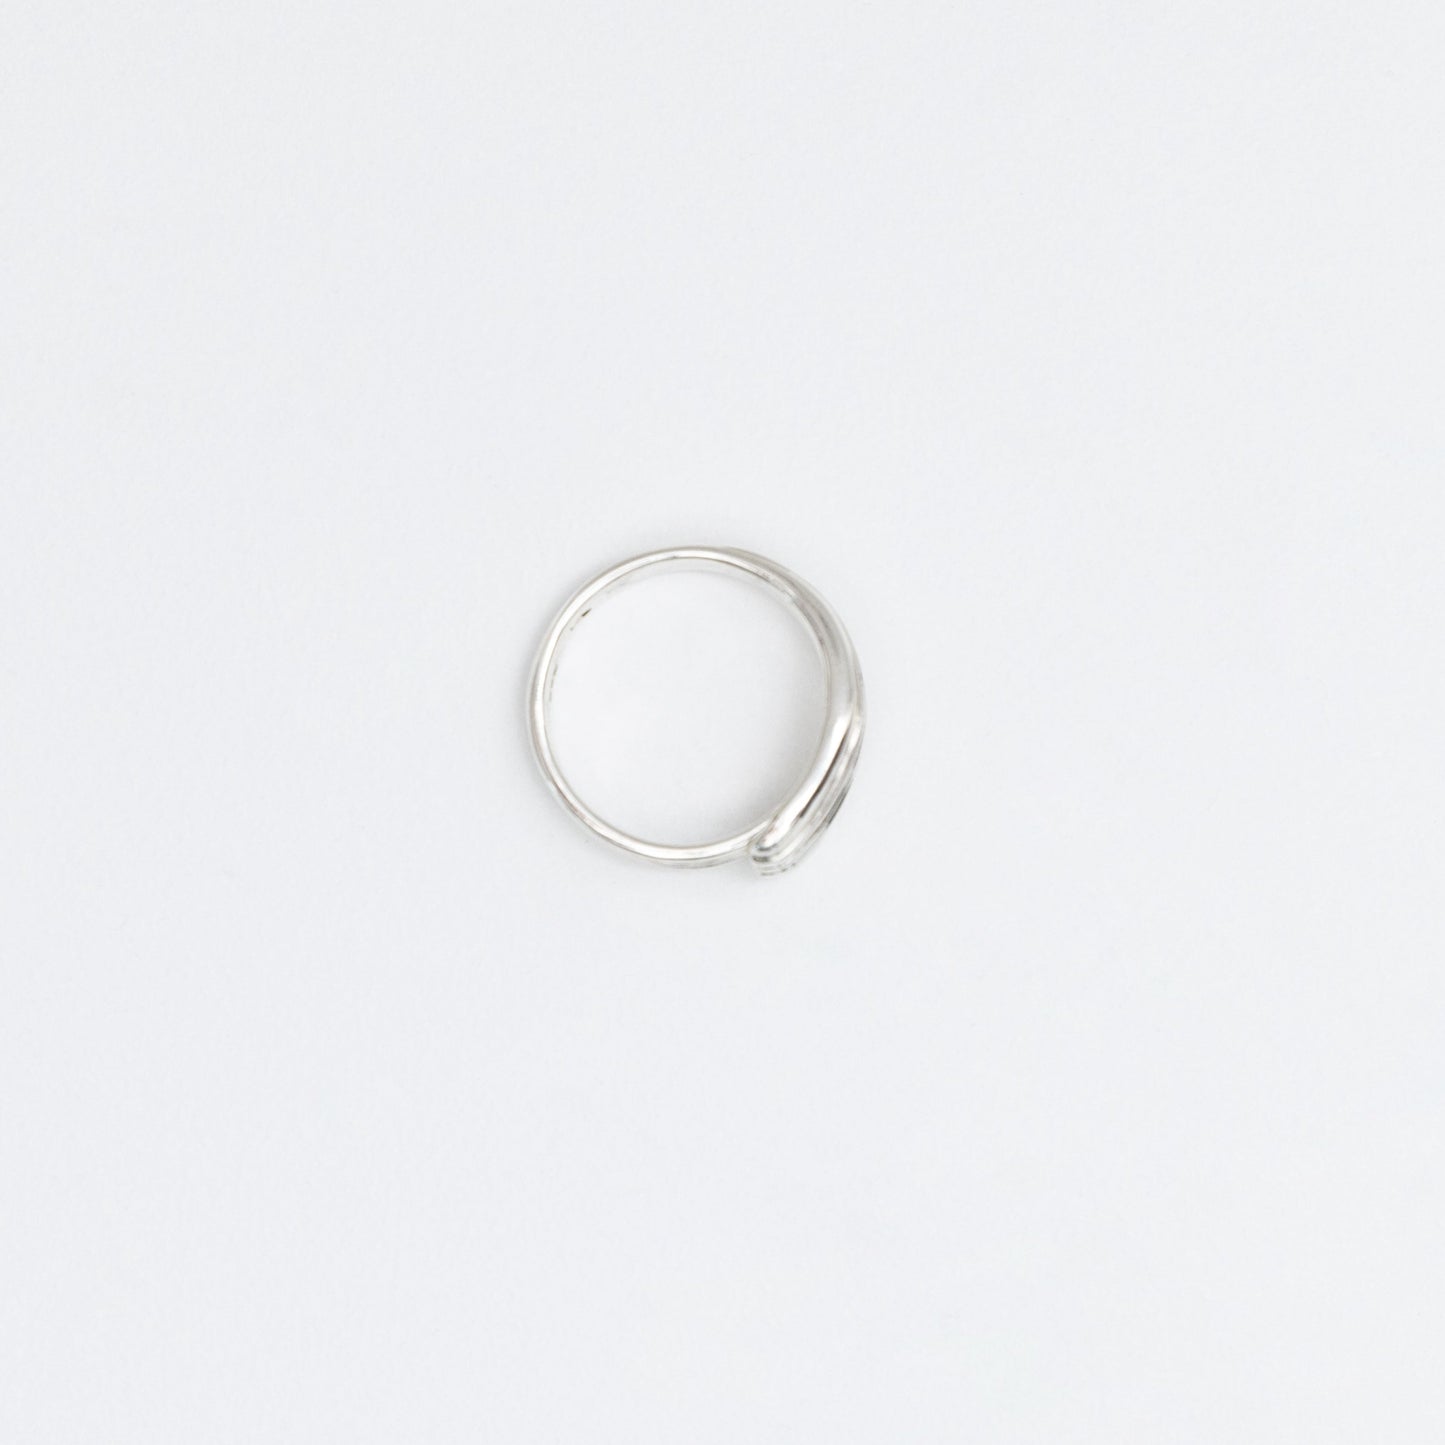 Adjustable silver ring, from above